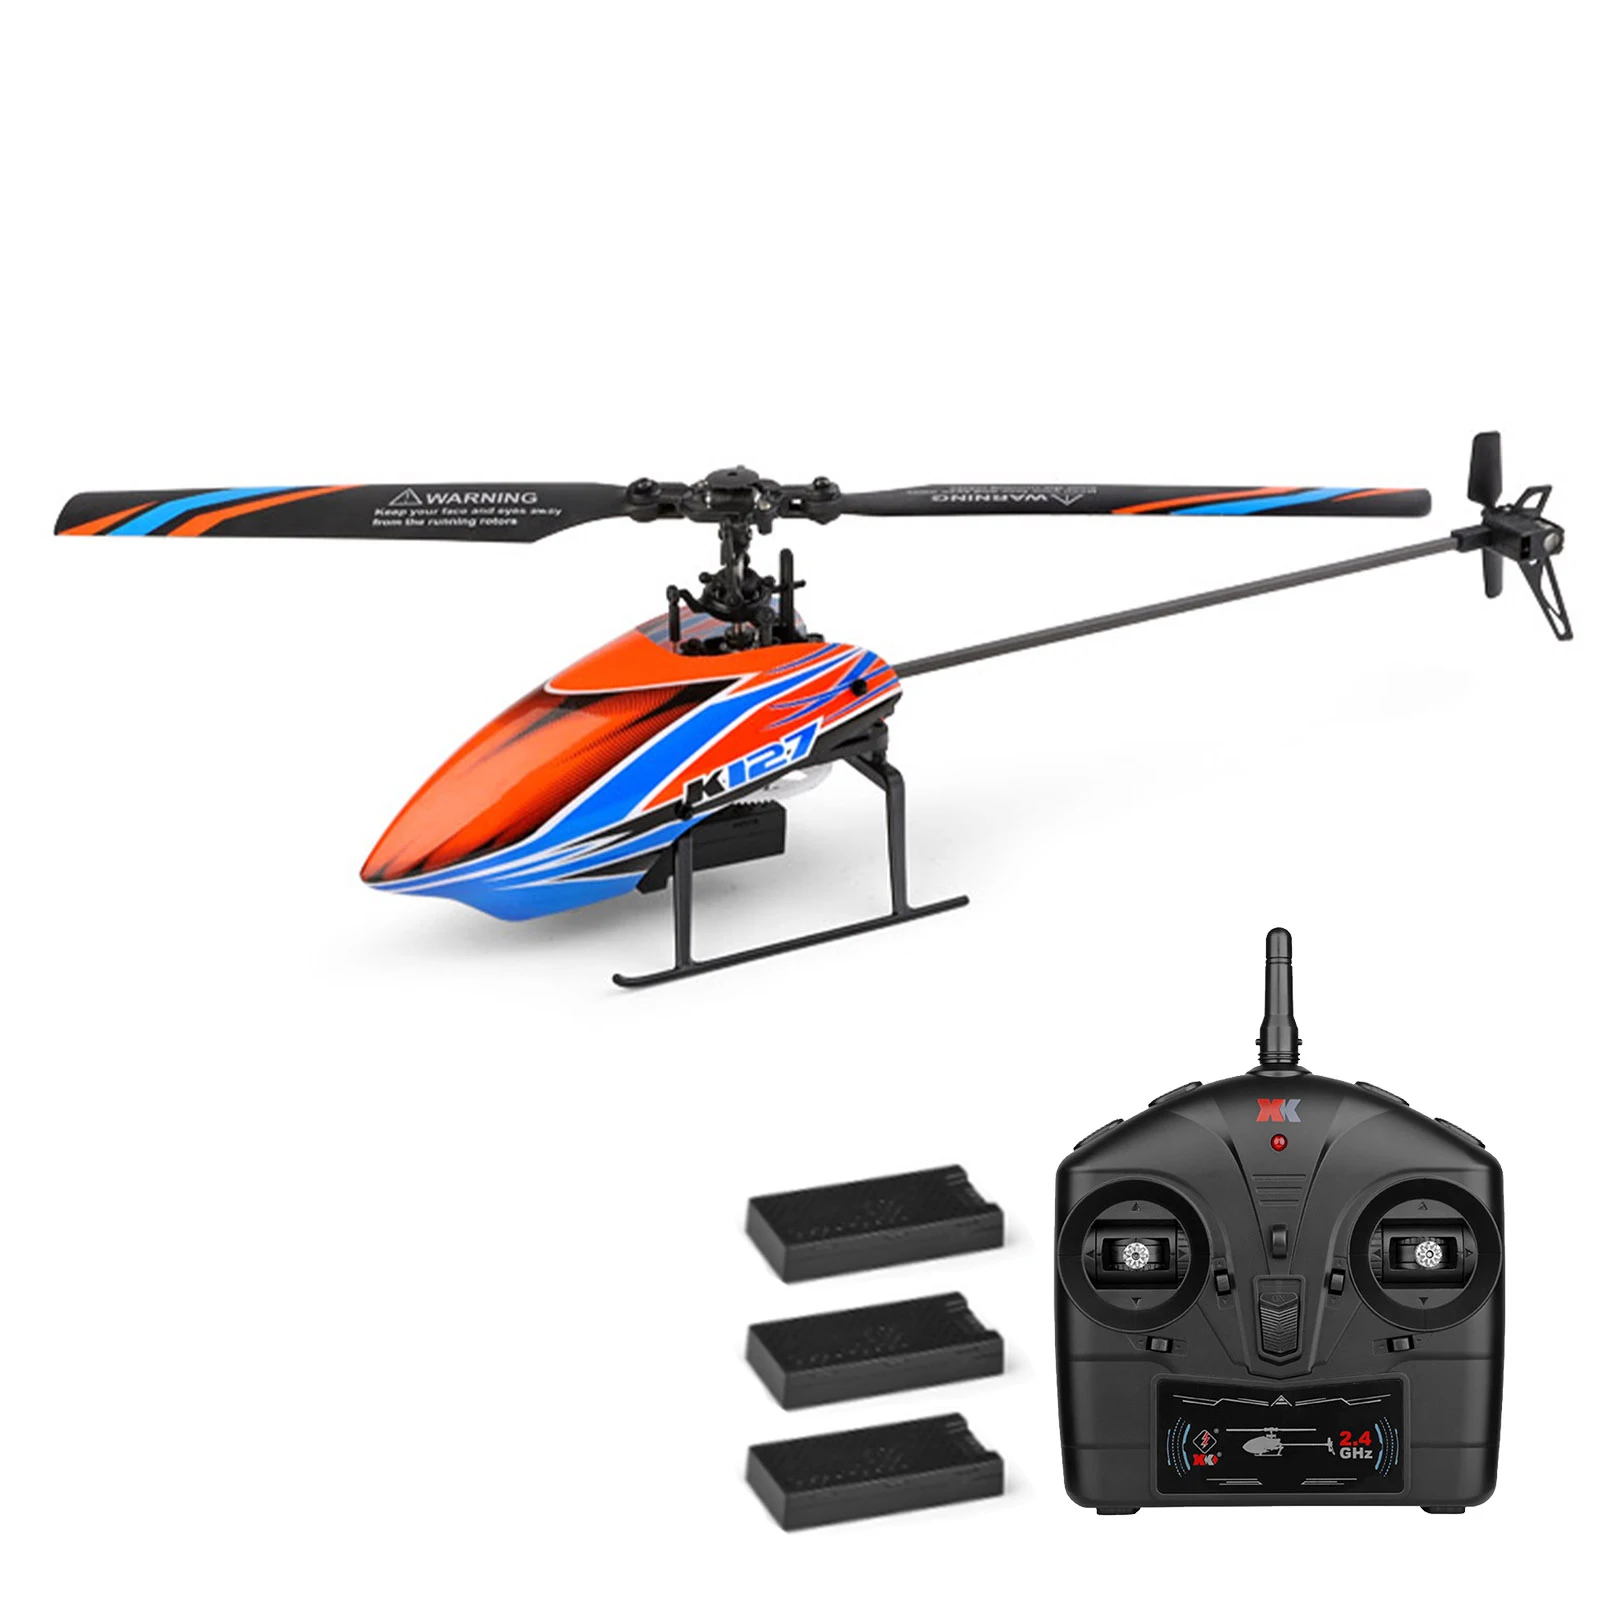 

WLtoys XKS K127 RC Helicopter for Beginners 6-axis Gyro Single Blade RC Aircraft Remote Control Plane Fixed Height 4CH RTF